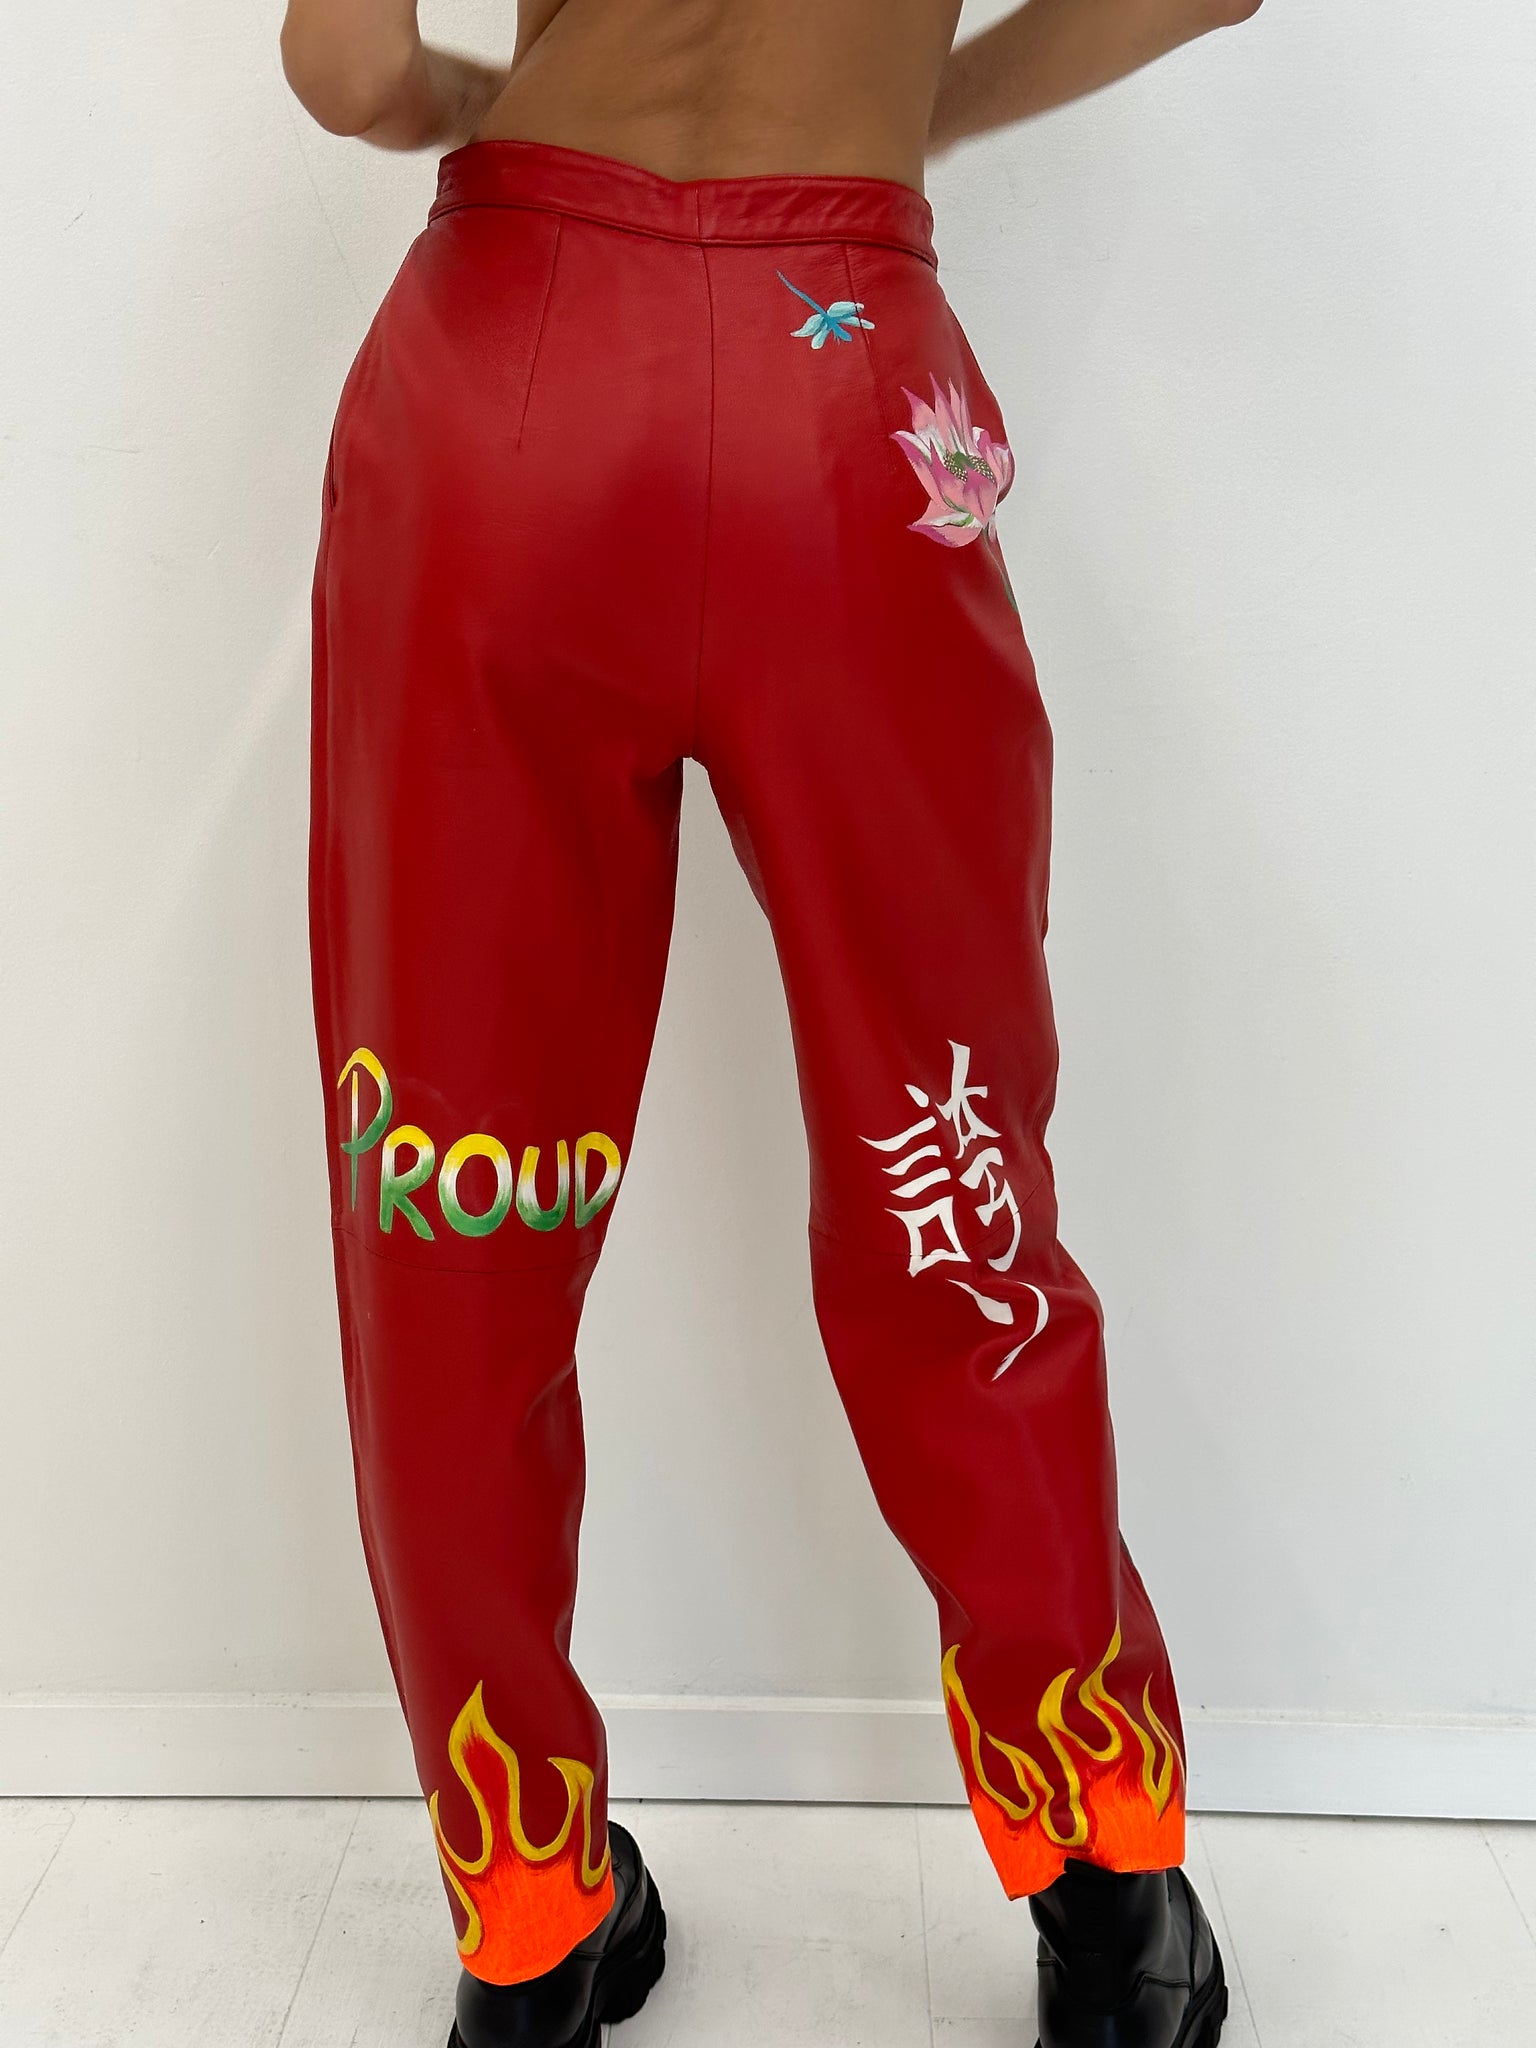 HAND-PAINTED RED LEATHER TROUSERS